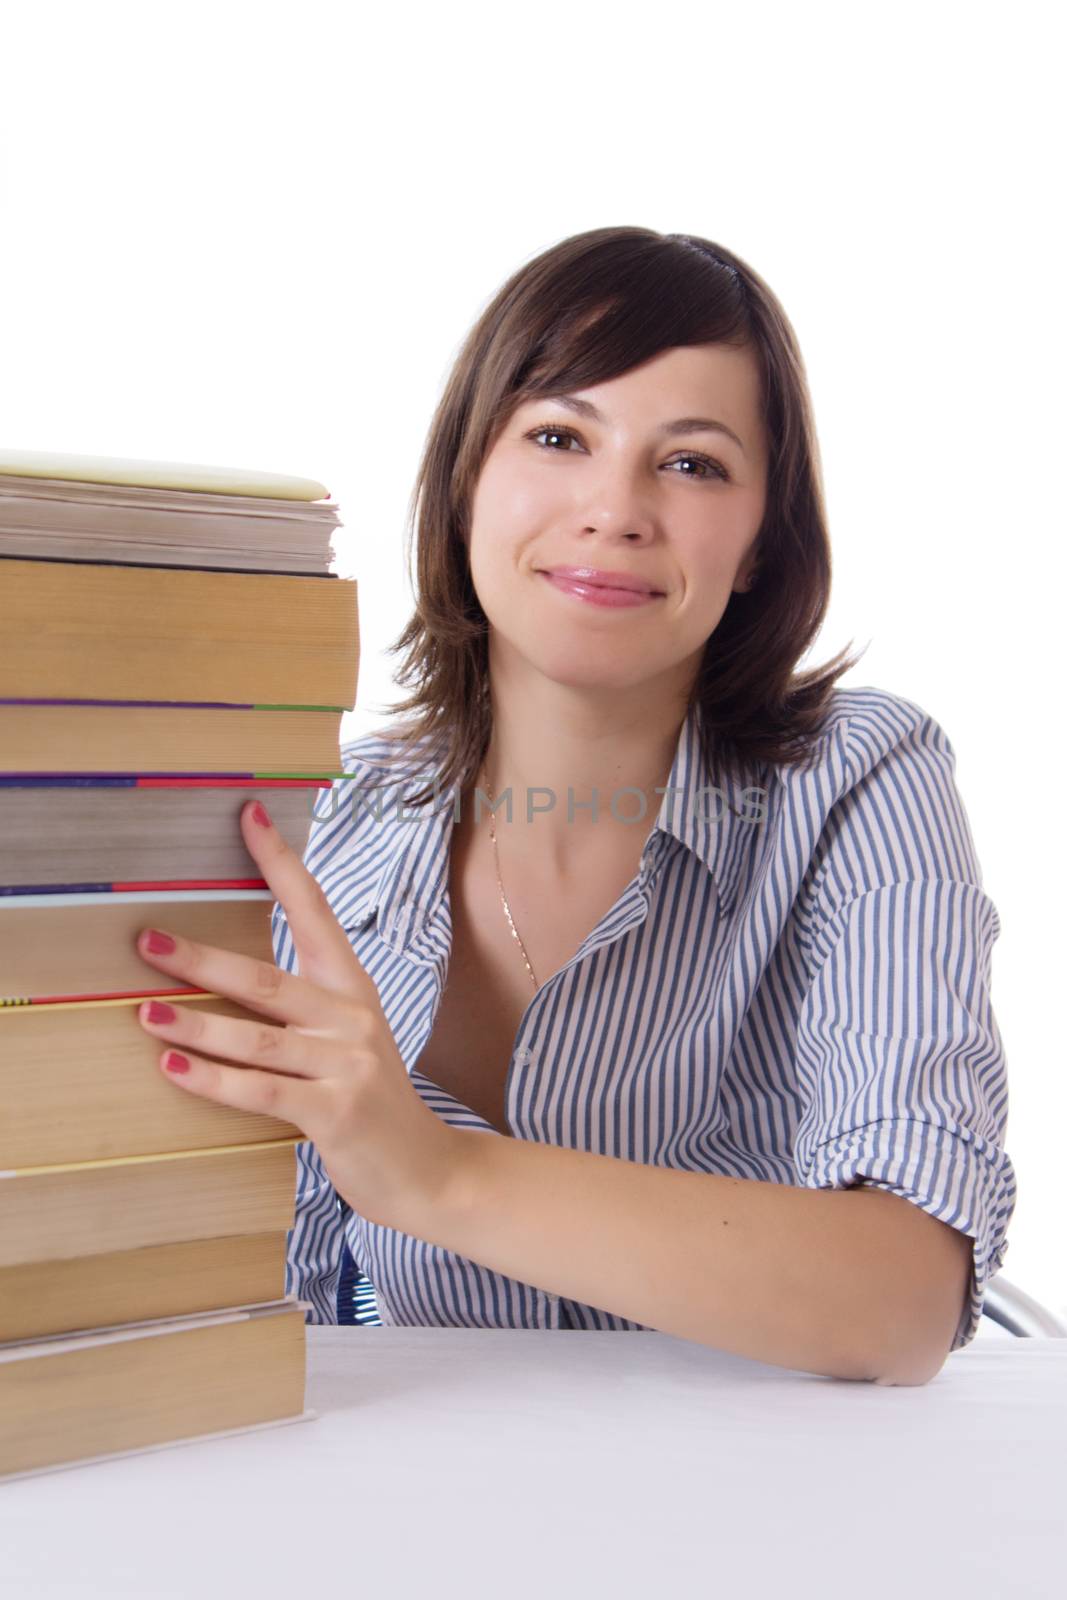 Smiling student girl sitting with pile of books isolated